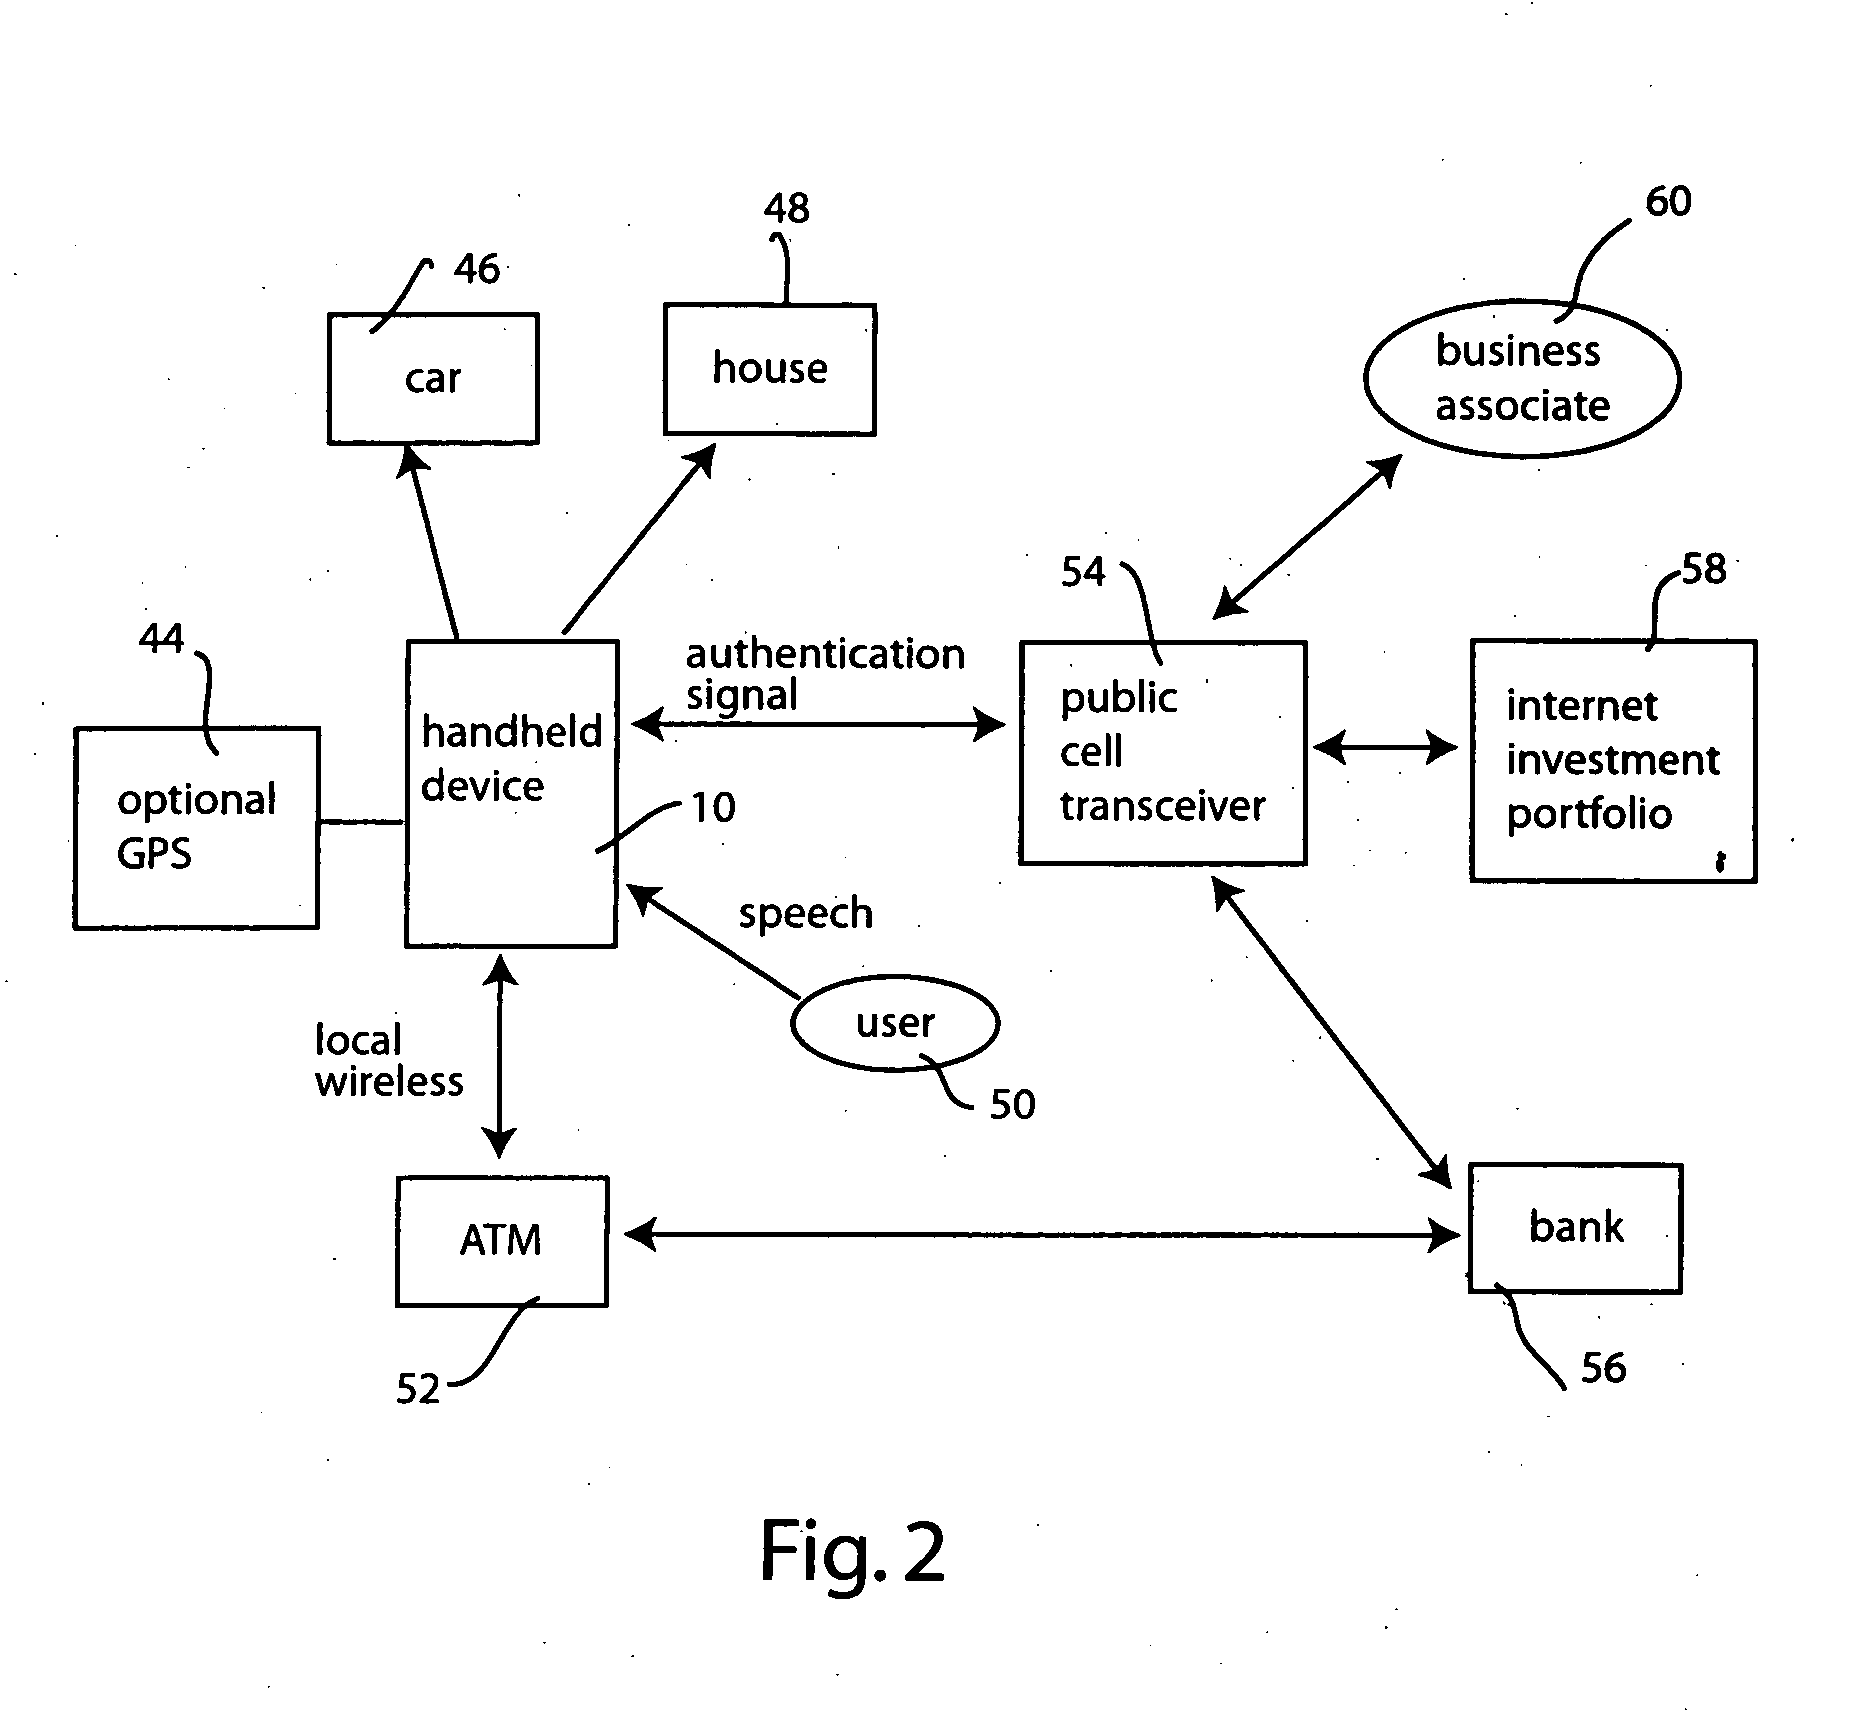 System and method for portable authentication